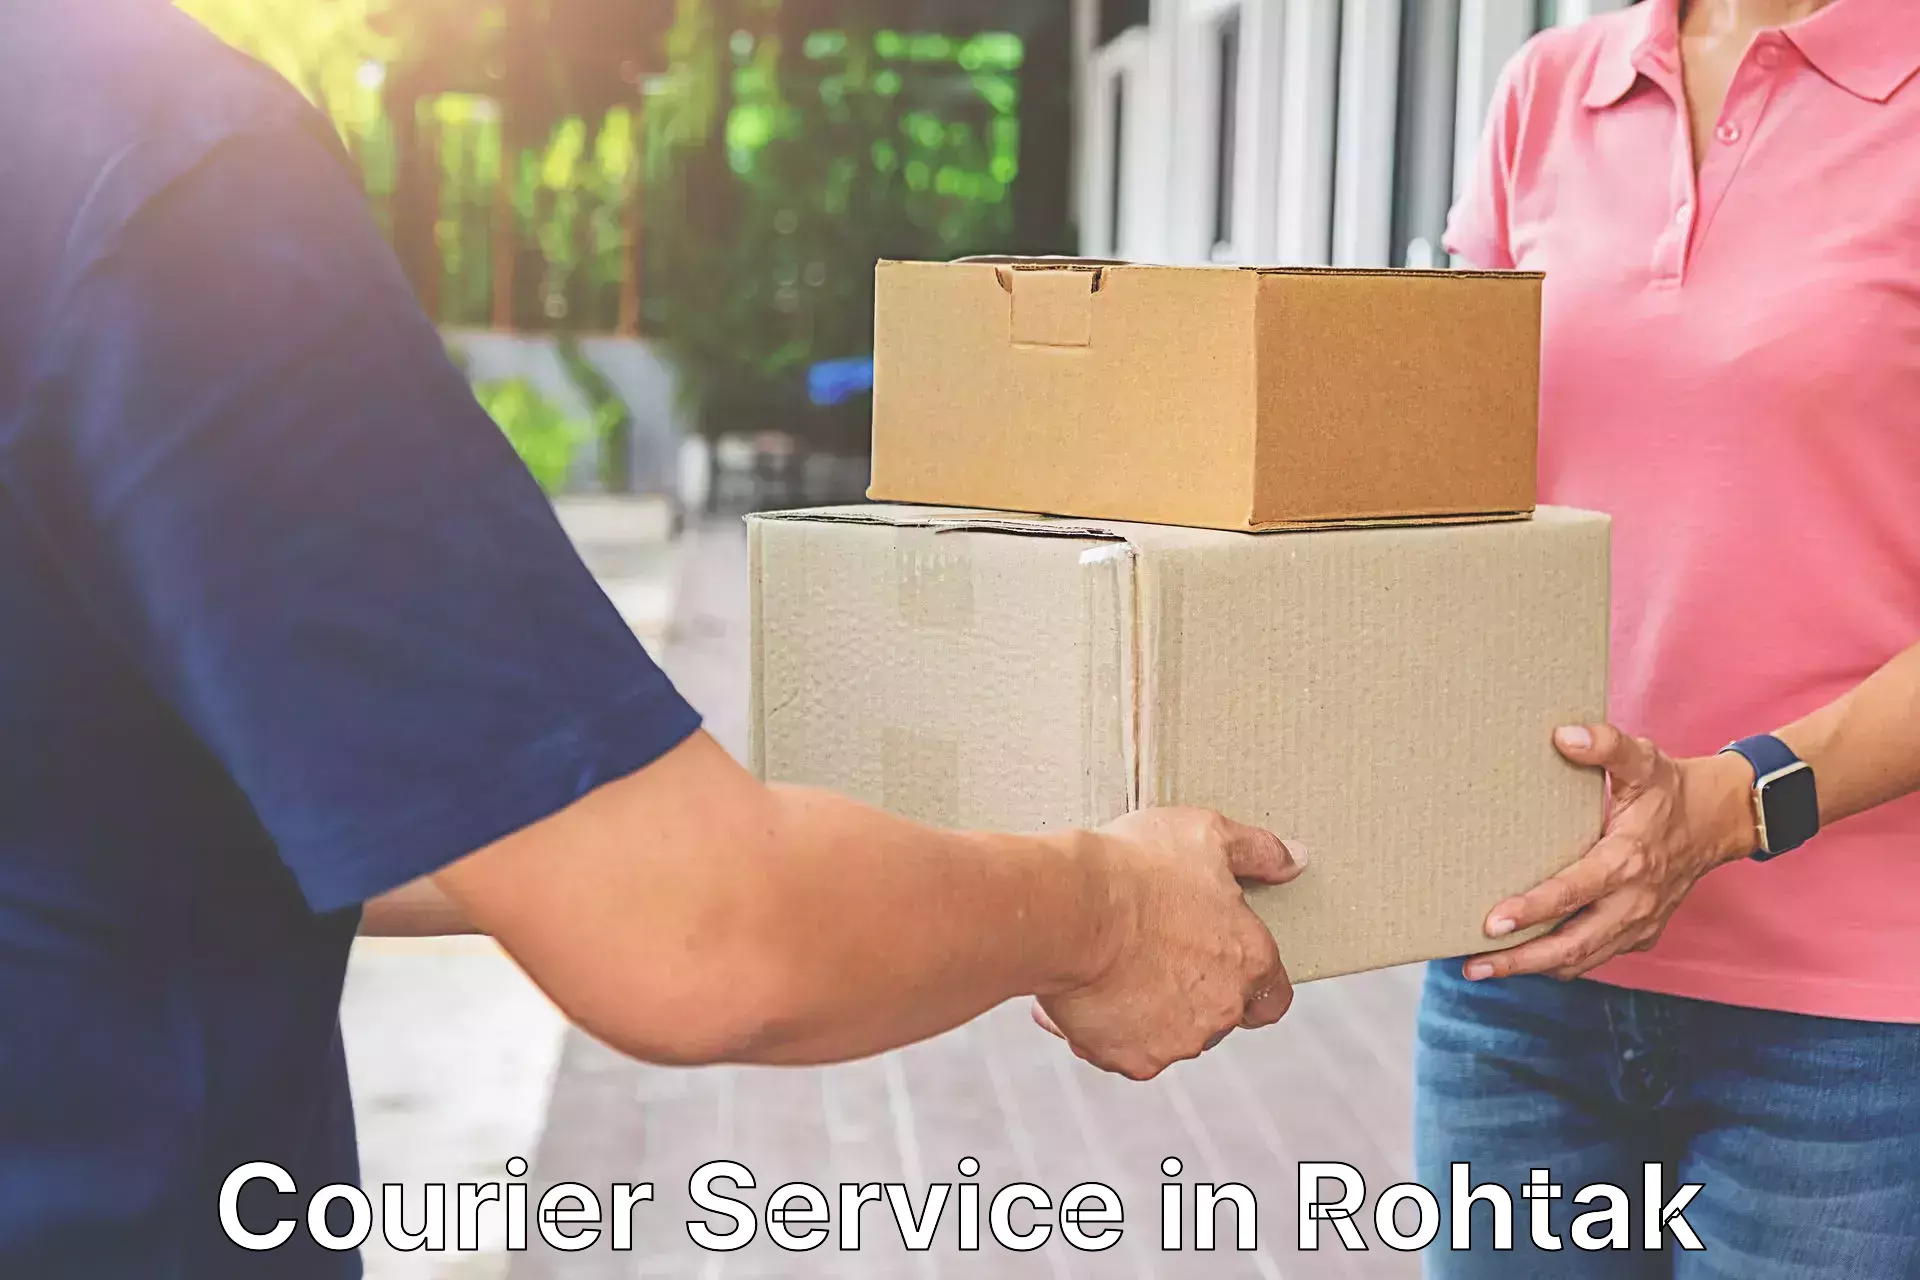 Cargo delivery service in Rohtak